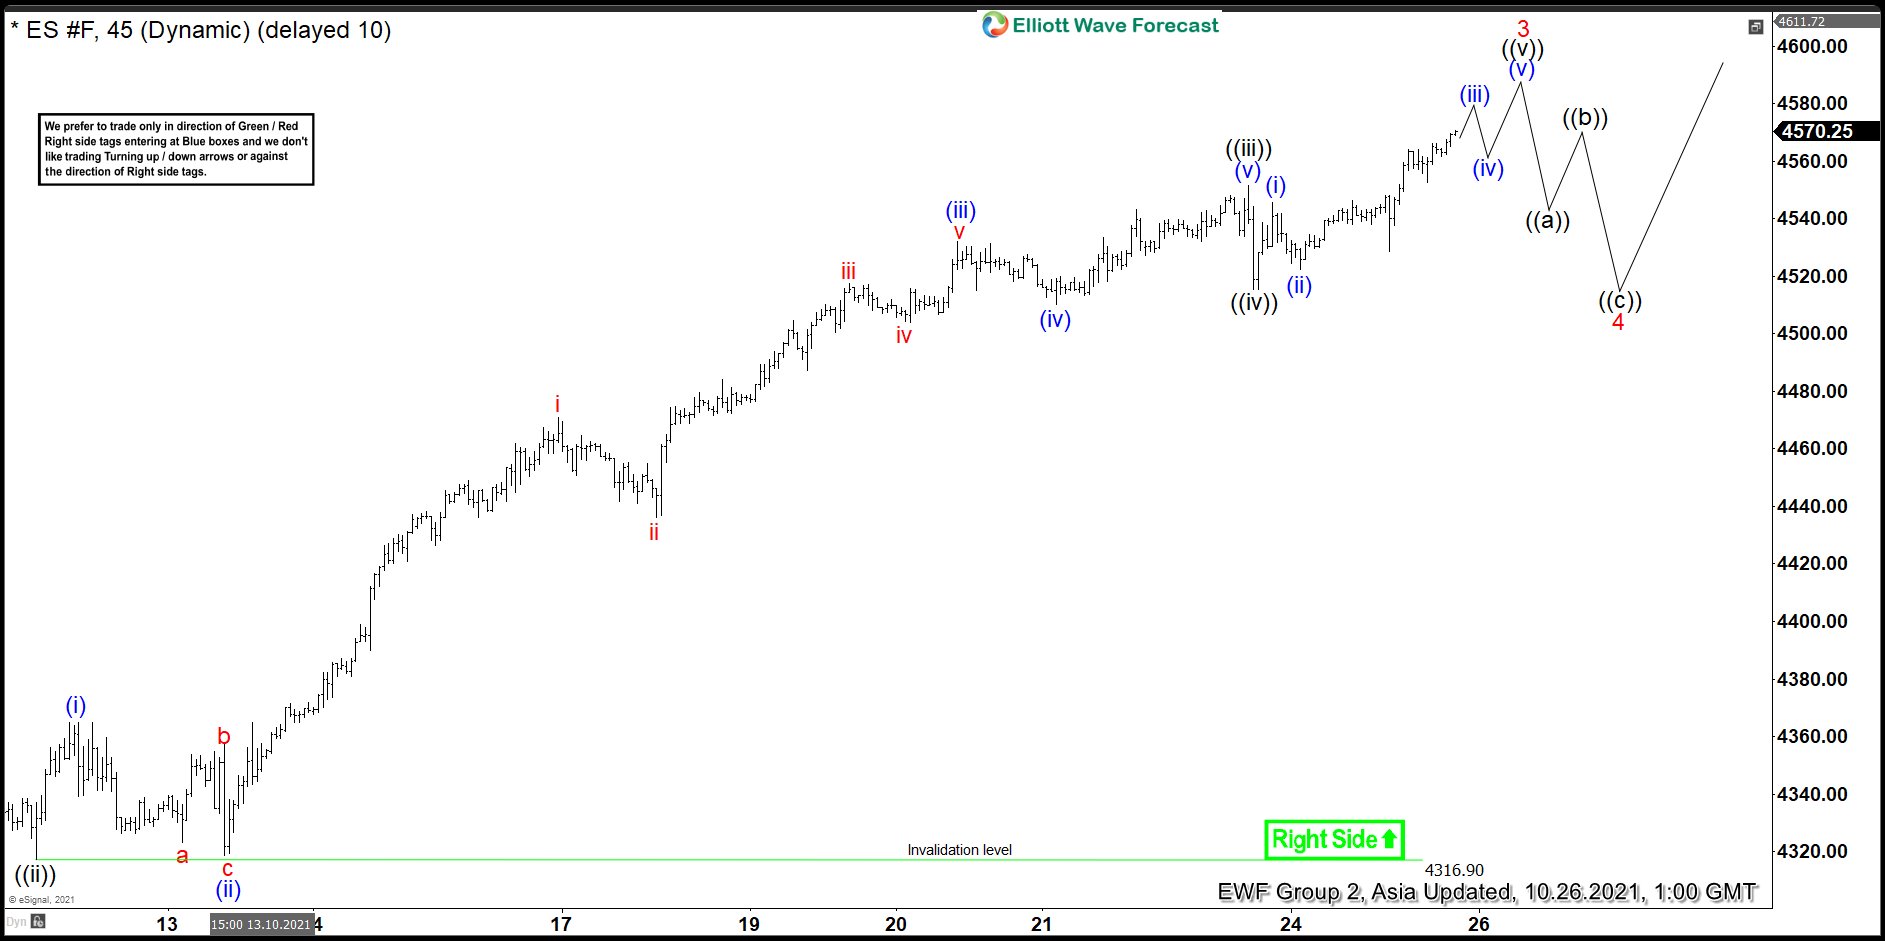 Elliott Wave View: S&P 500 Futures (ES) Breaking to New High